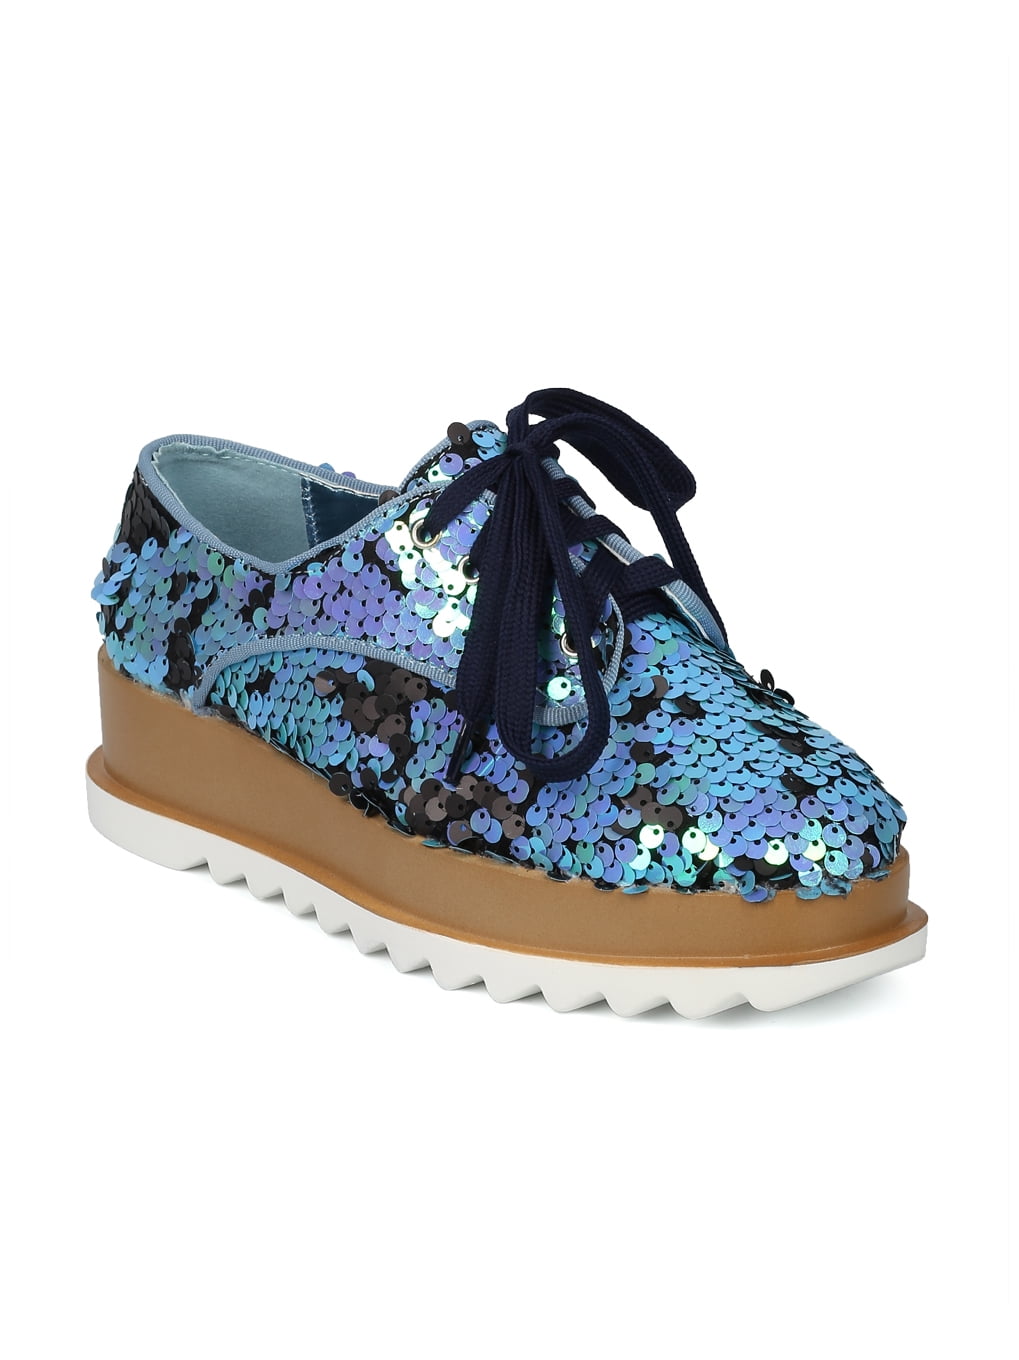 Women's Fashion Chic Comfortable Platform Sequin Sneakers Zyra-1 by Cape Robbins 